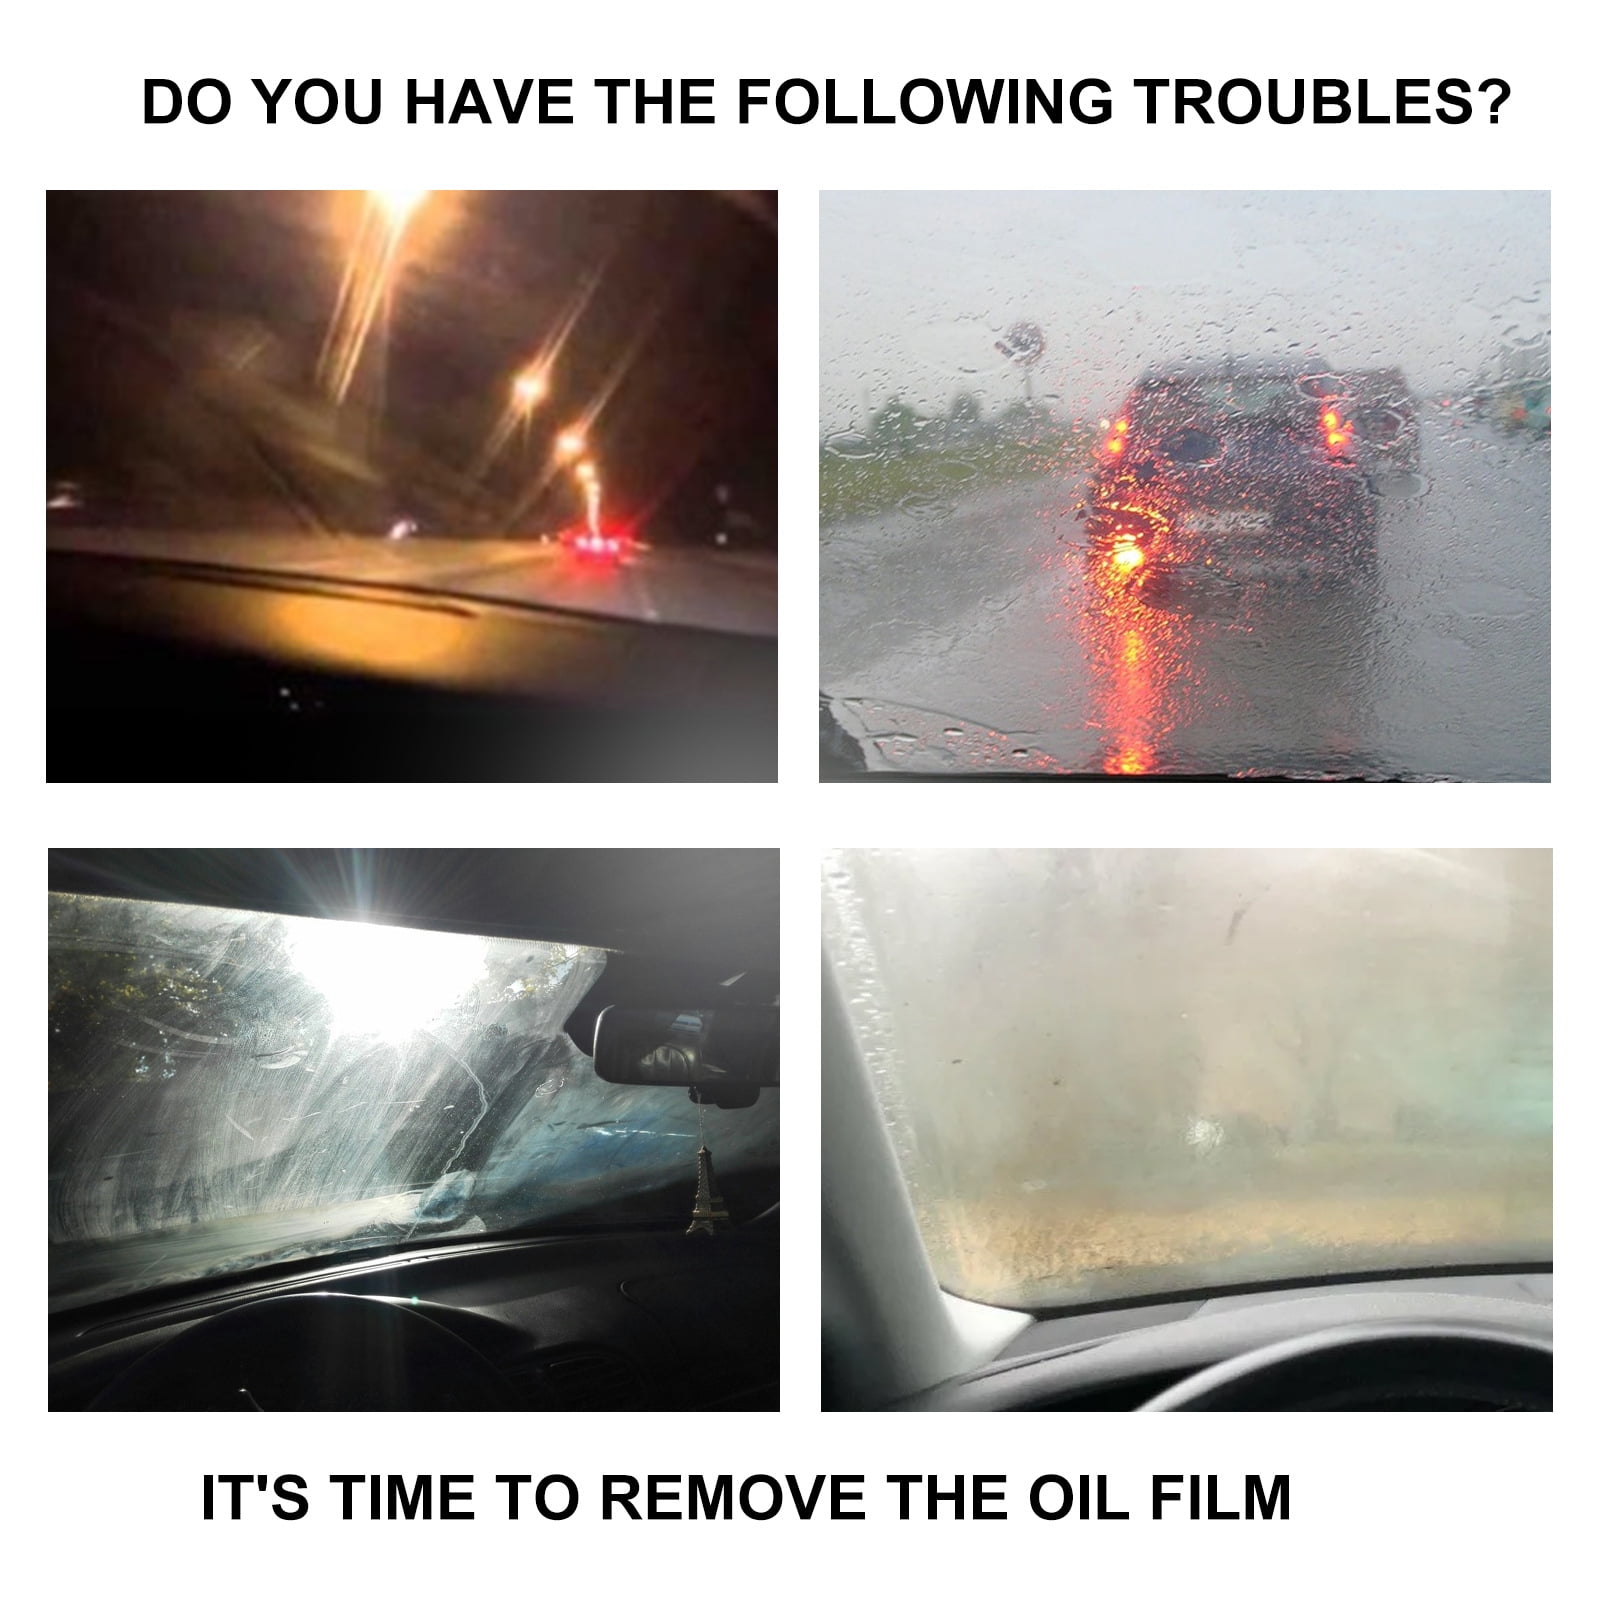 Windshield has a hazy film over it. Cleaning doesn't help and I